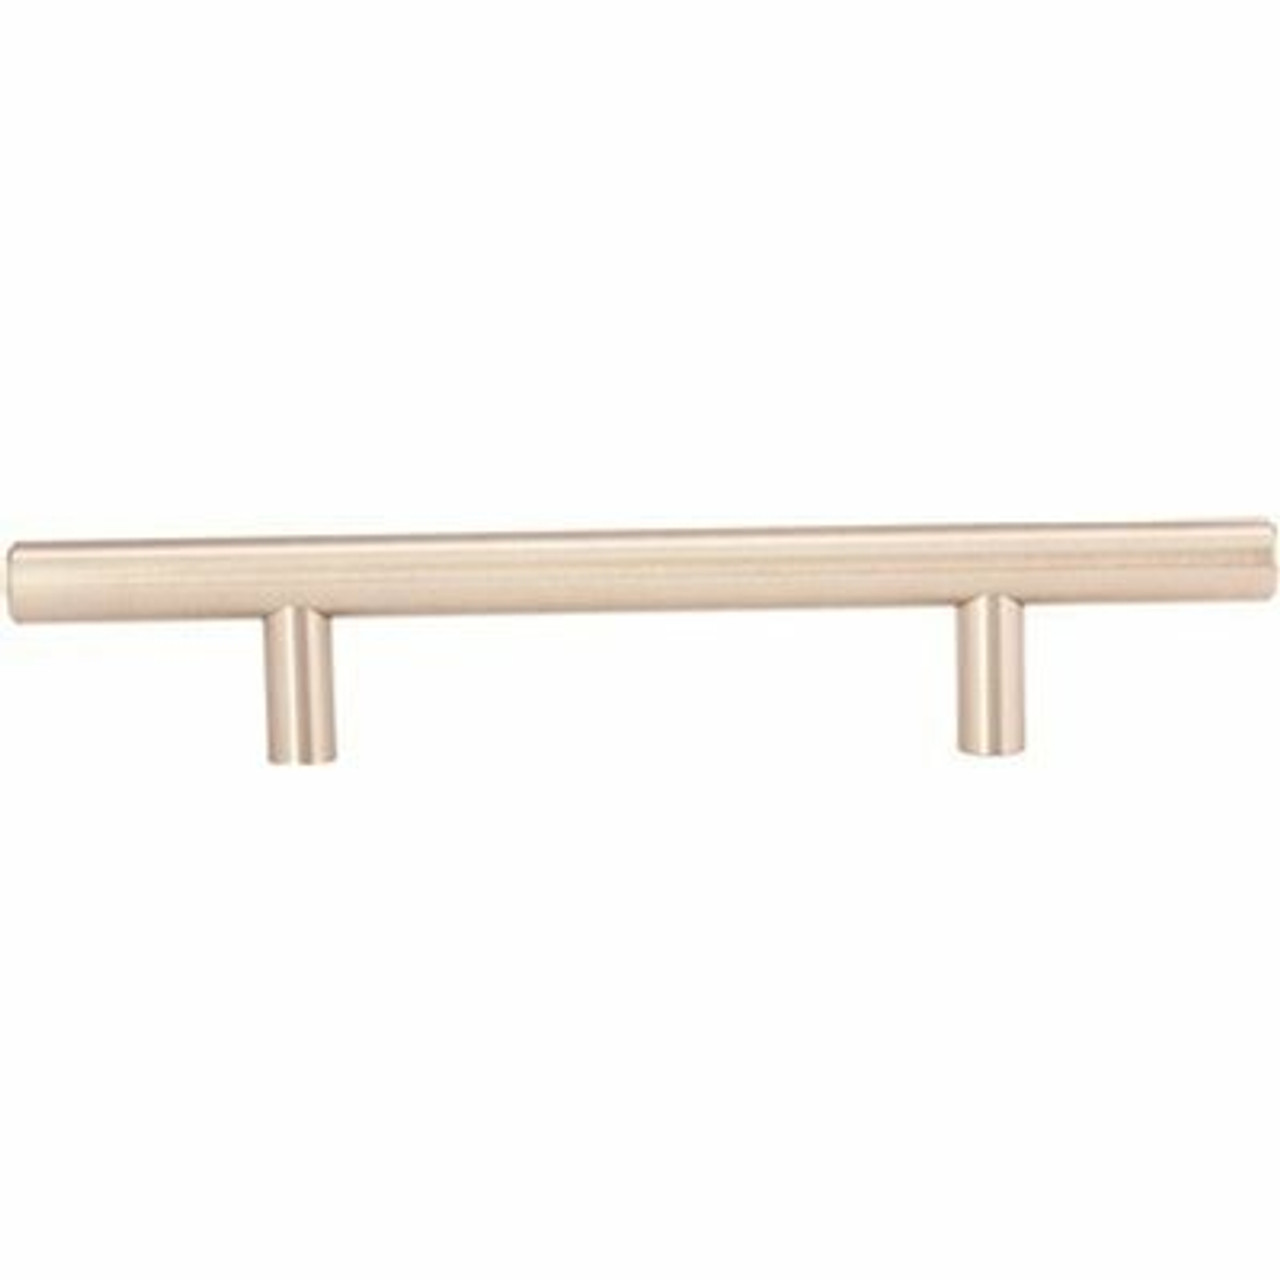 Anvil Mark 7 In. Satin Nickel Cabinet Drawer Center-To-Center Pull (5-Pack) - 2491942